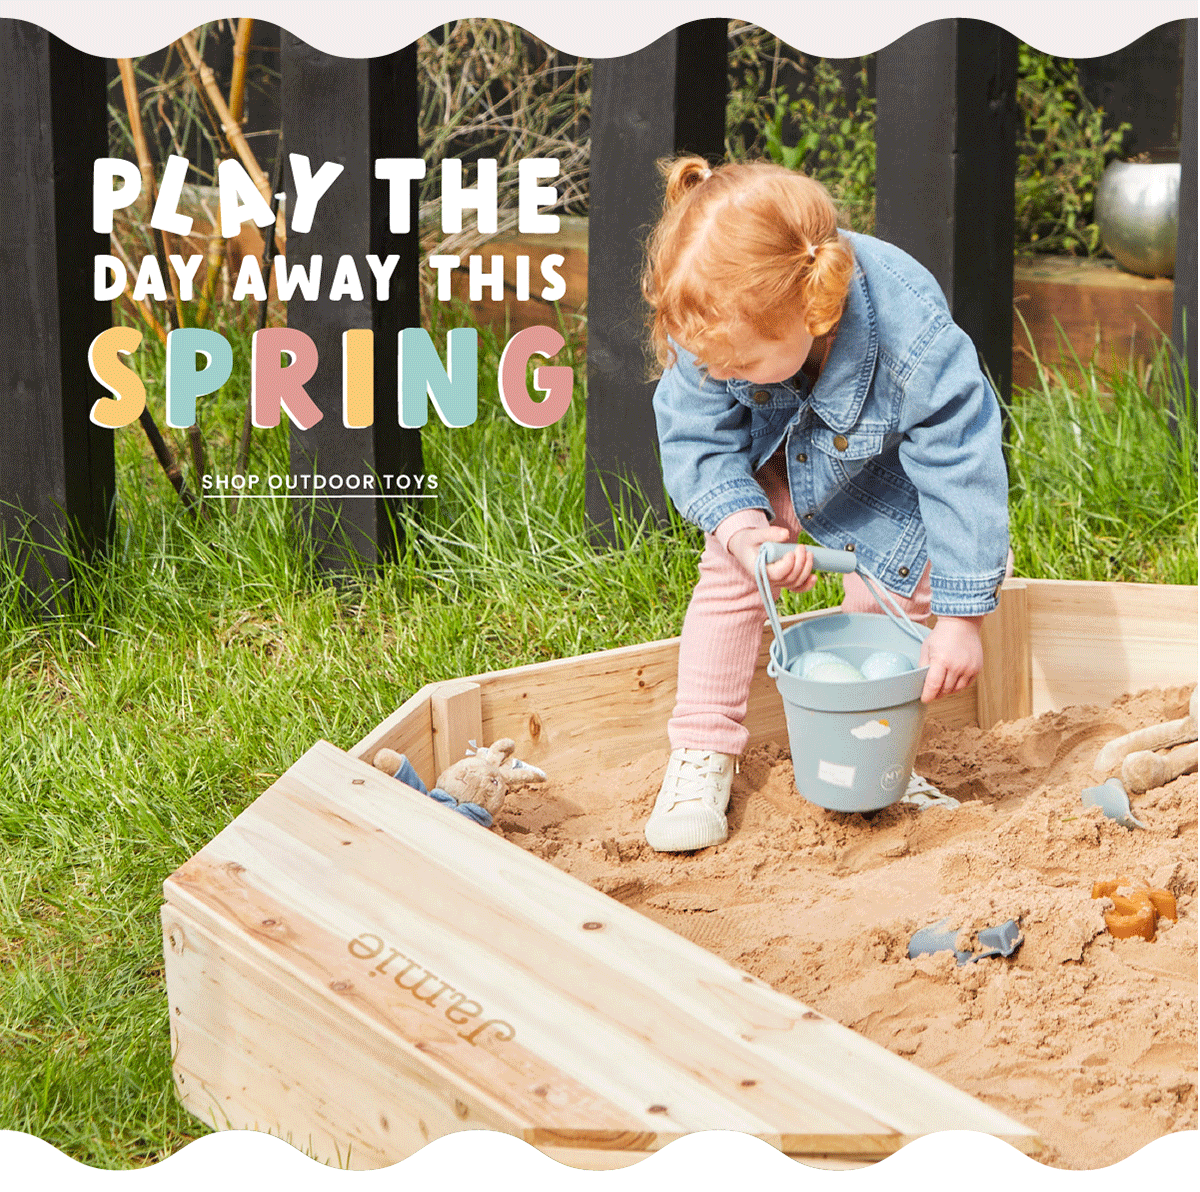 Play the day away this spring with outdoor toys